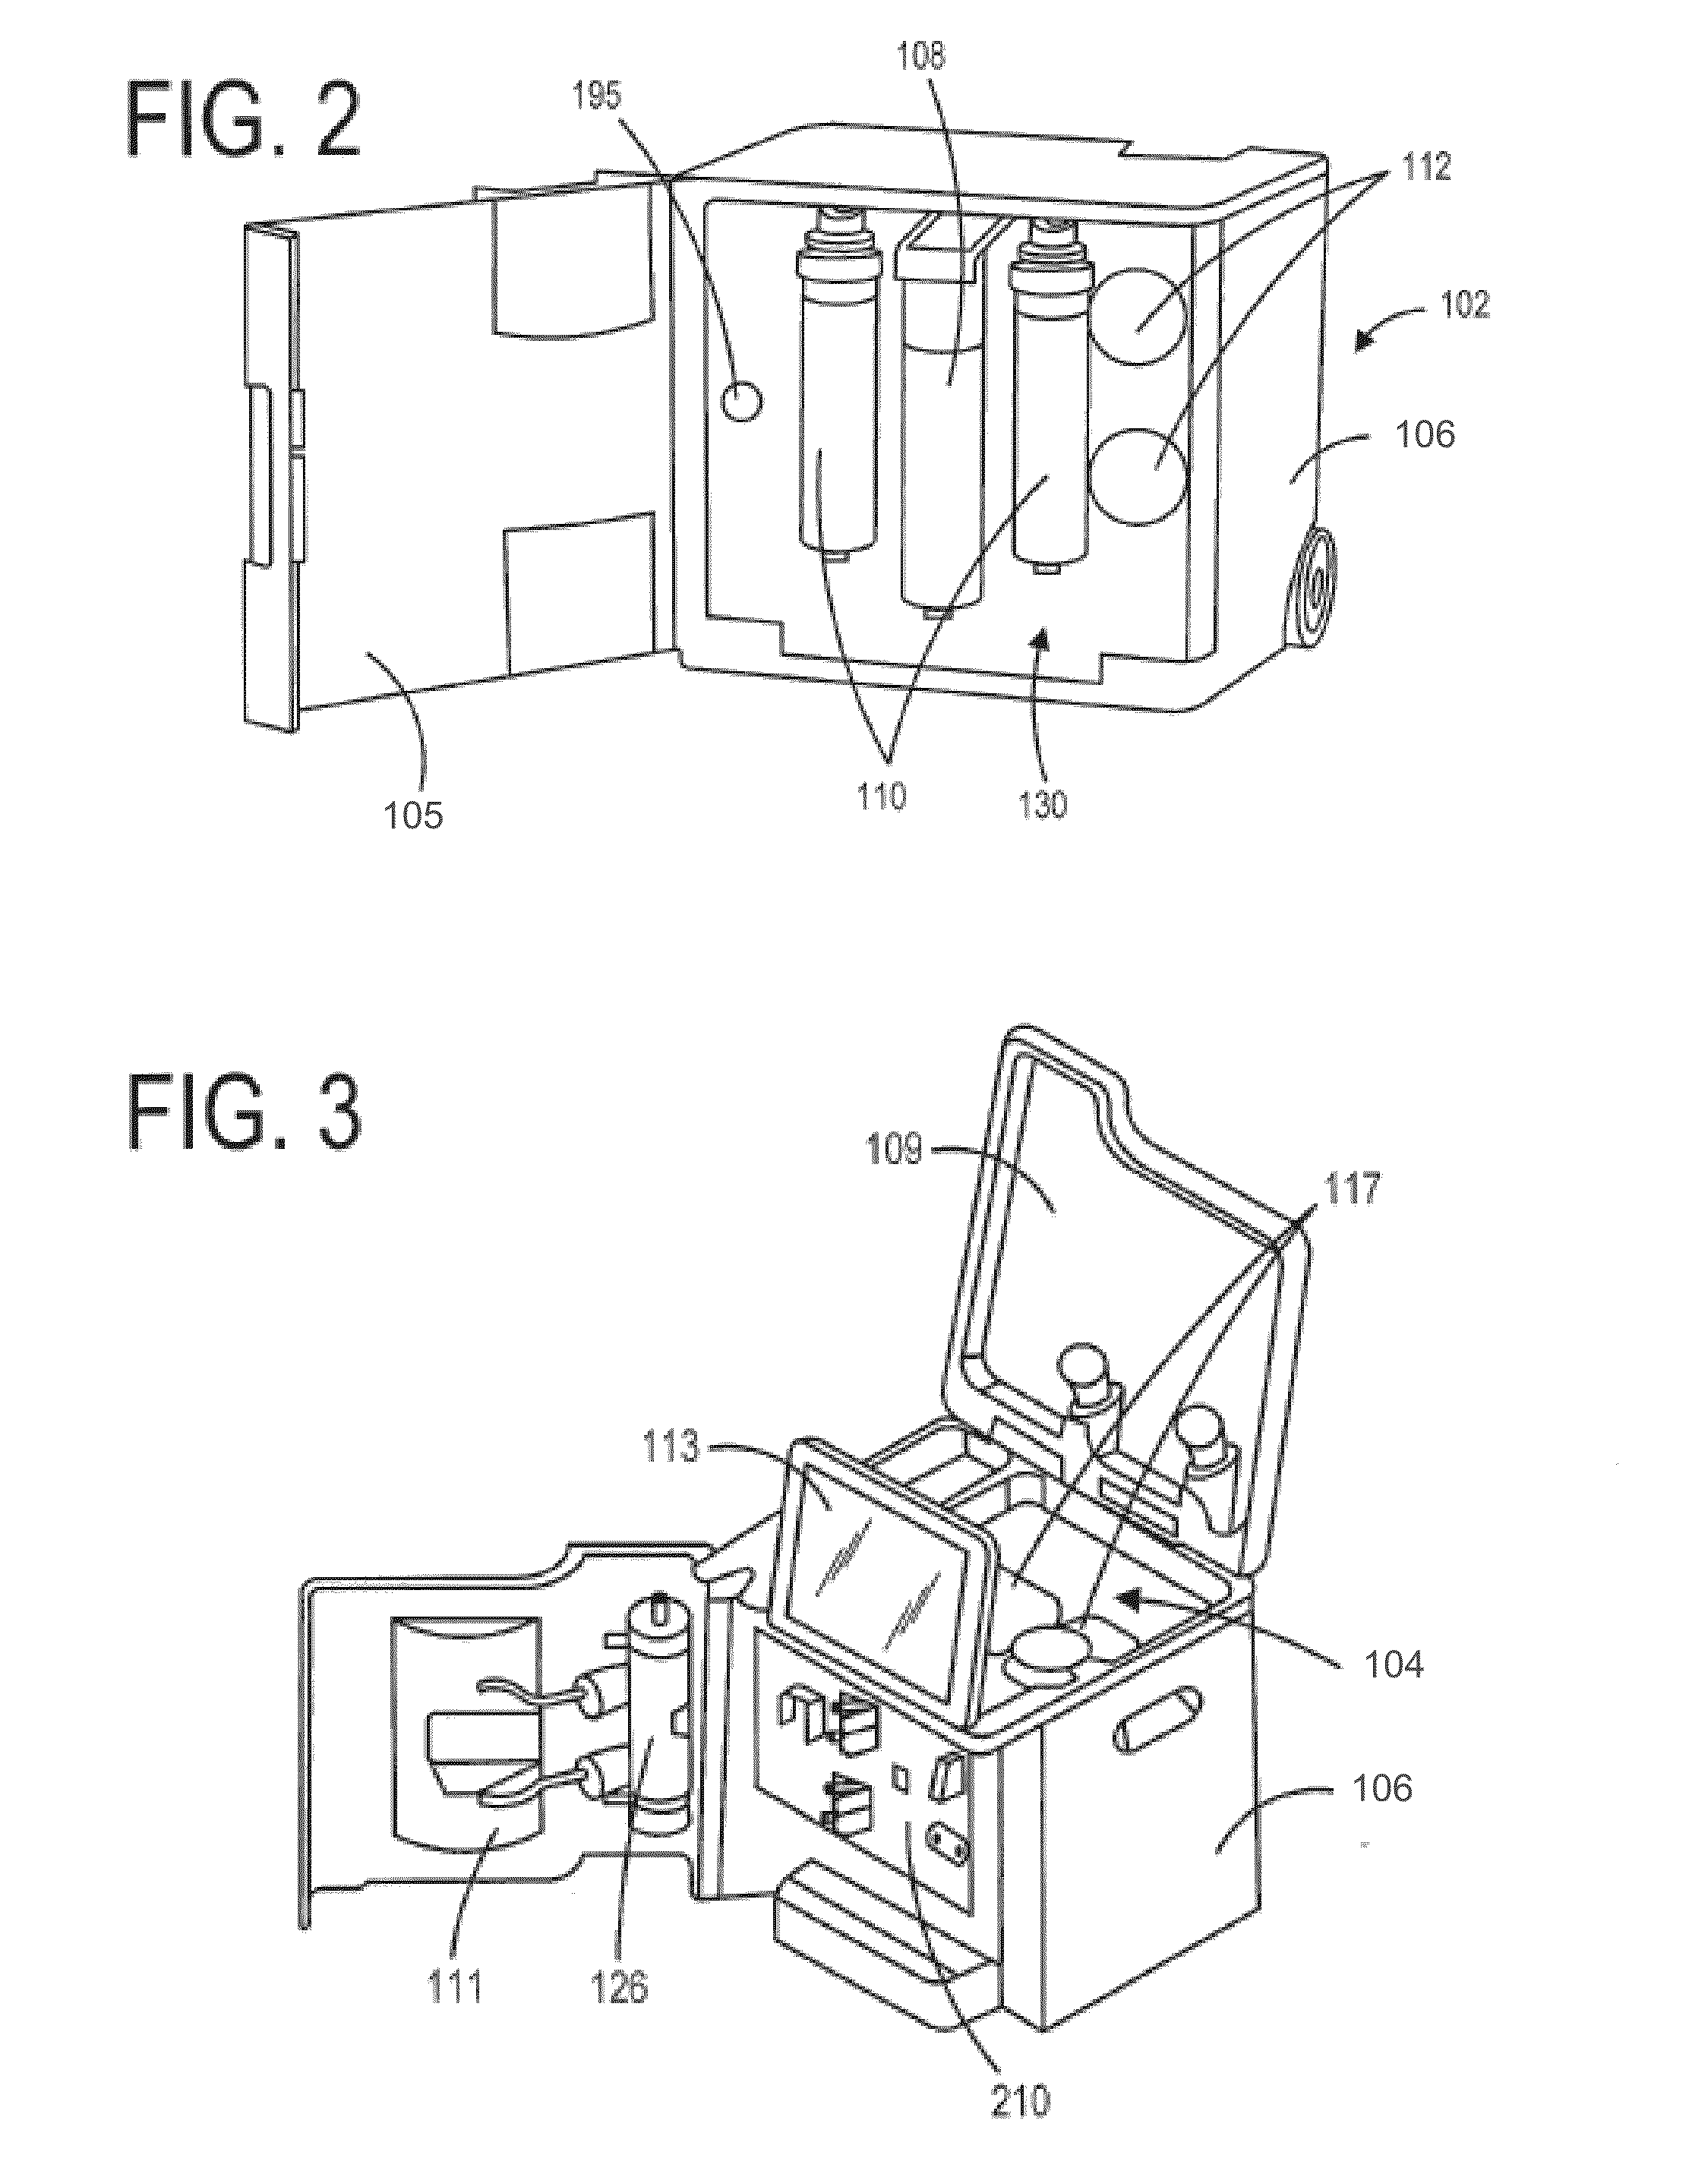 Dialysis system and methods